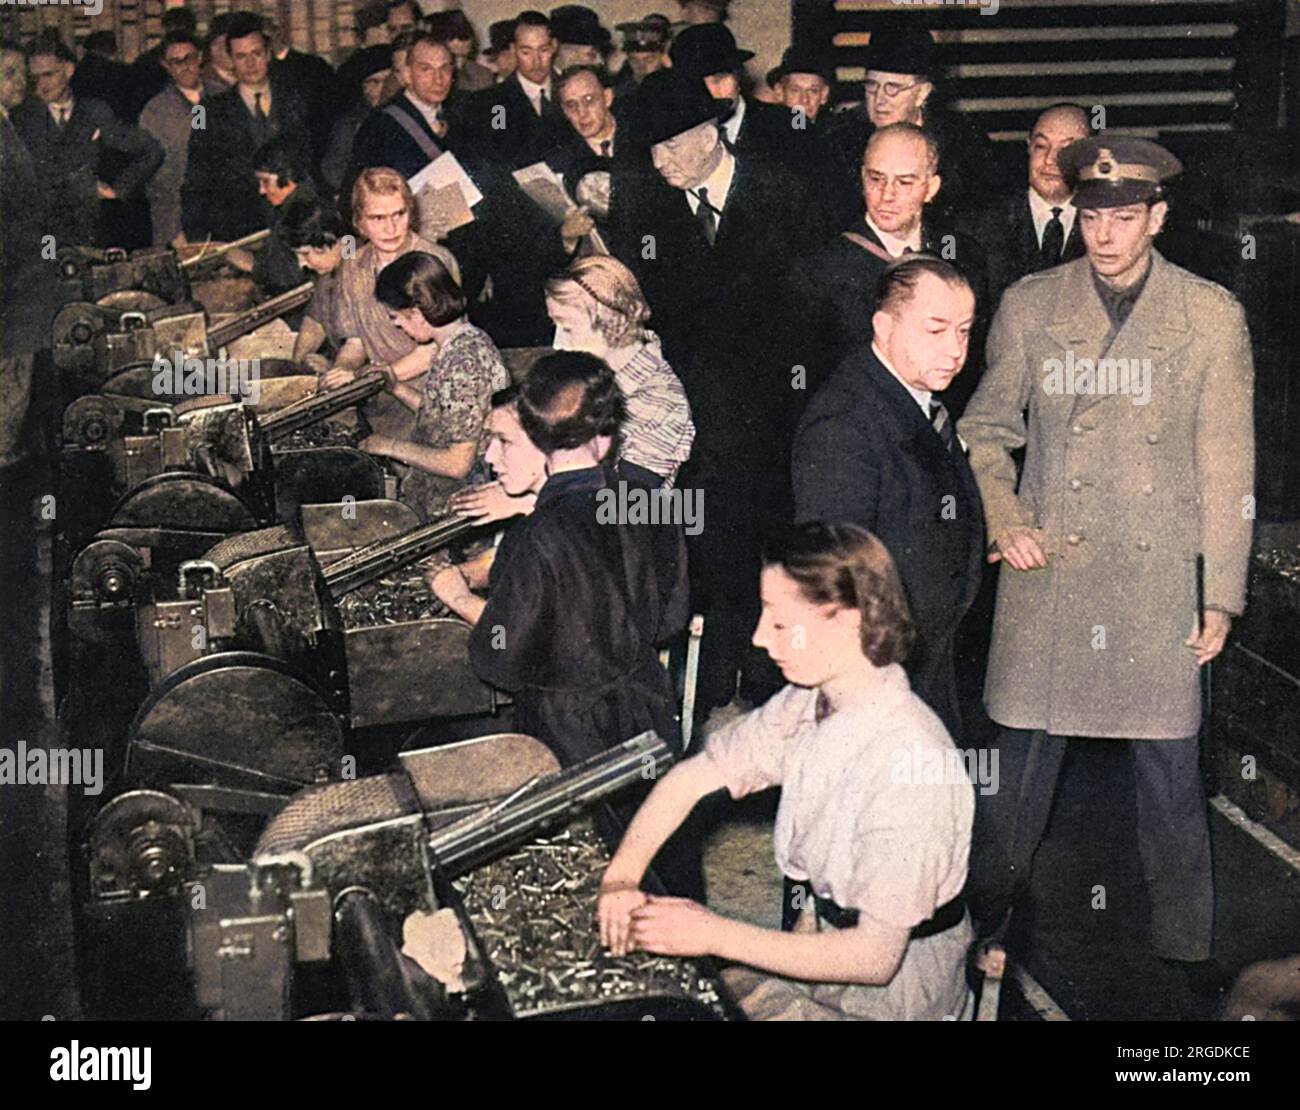 King George VI being given a tour of inspection of a Royal Ordnance factory and seeing at first-hand the immense effort being put in to produce arms, in this case anti-aircraft and anti-tank guns.  Picture shows the King watching some of the women workers in the factory sorting ammunition. Stock Photo